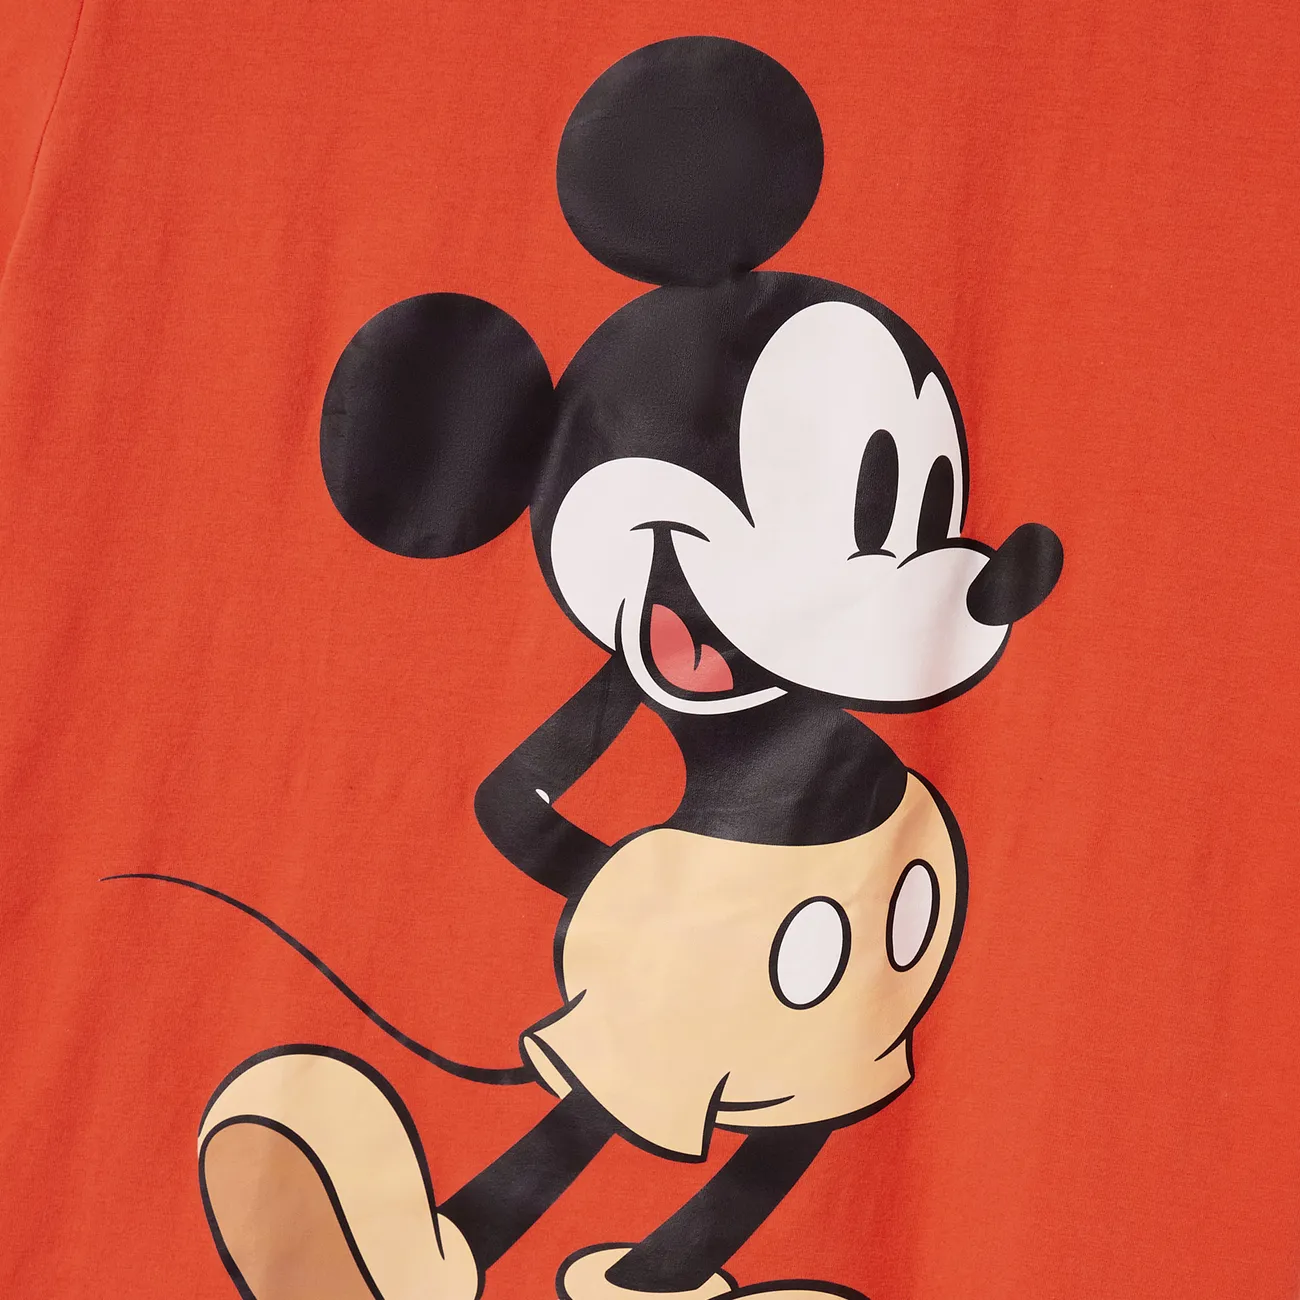 Disney Mickey and Friends Family Matching Cotton Grid/Houndstooth Character Print Tee/Sleeveless Dress Orange big image 1